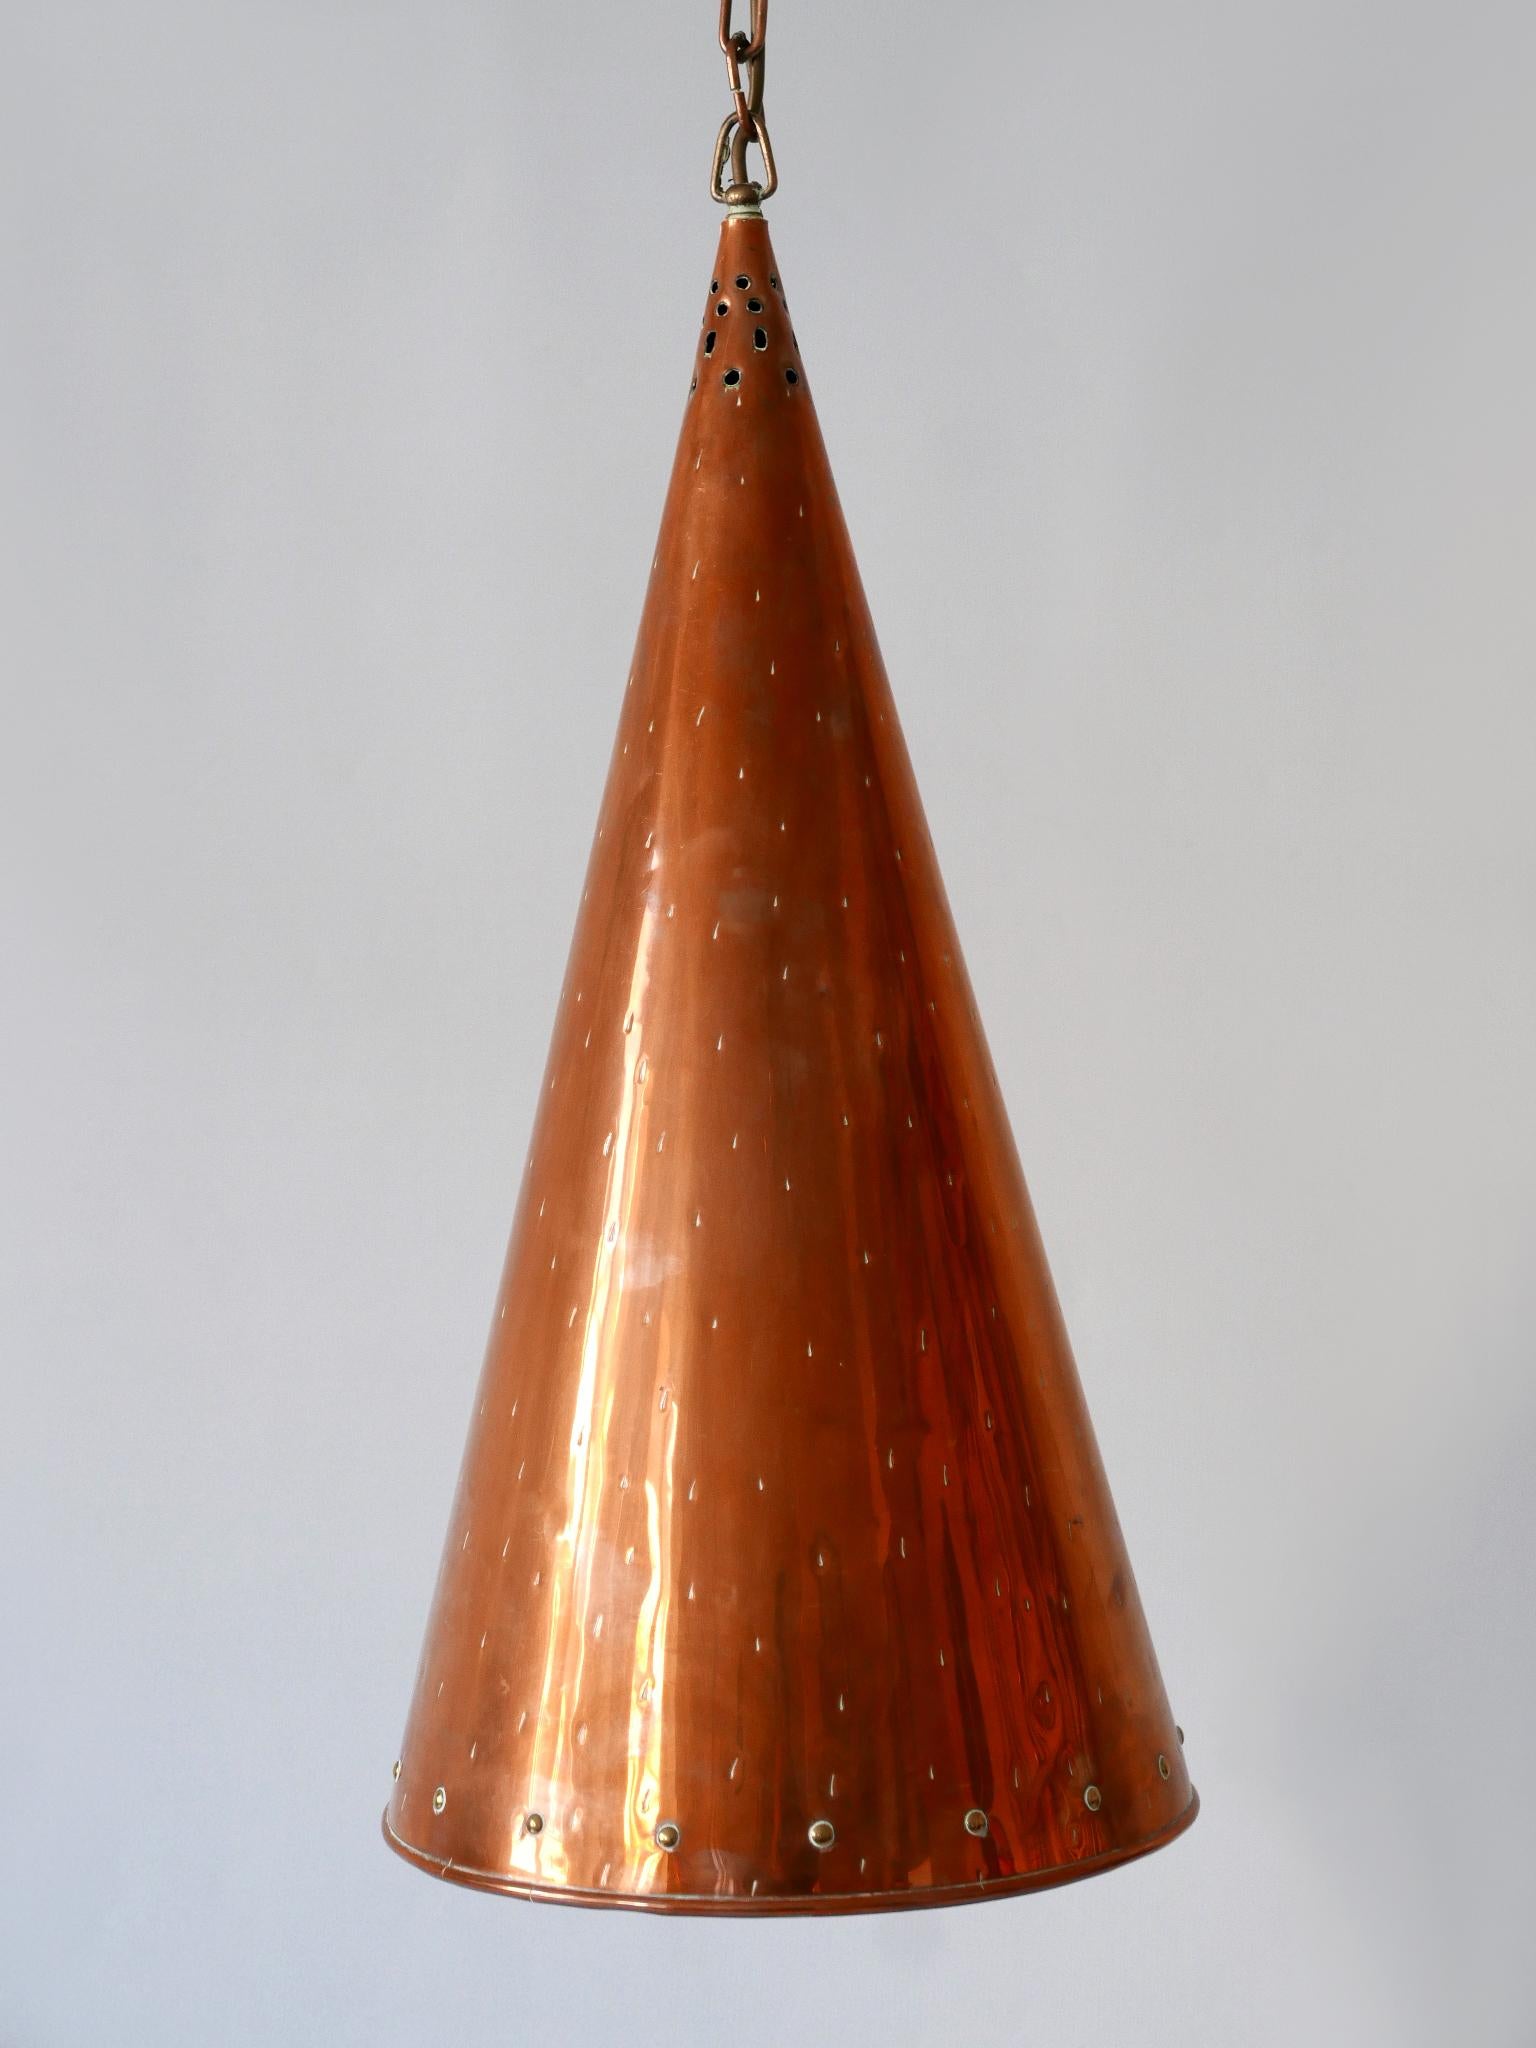 XL Mid Century Modern Copper Pendant Lamp by E.S. Horn Aalestrup Denmark 1950s For Sale 7